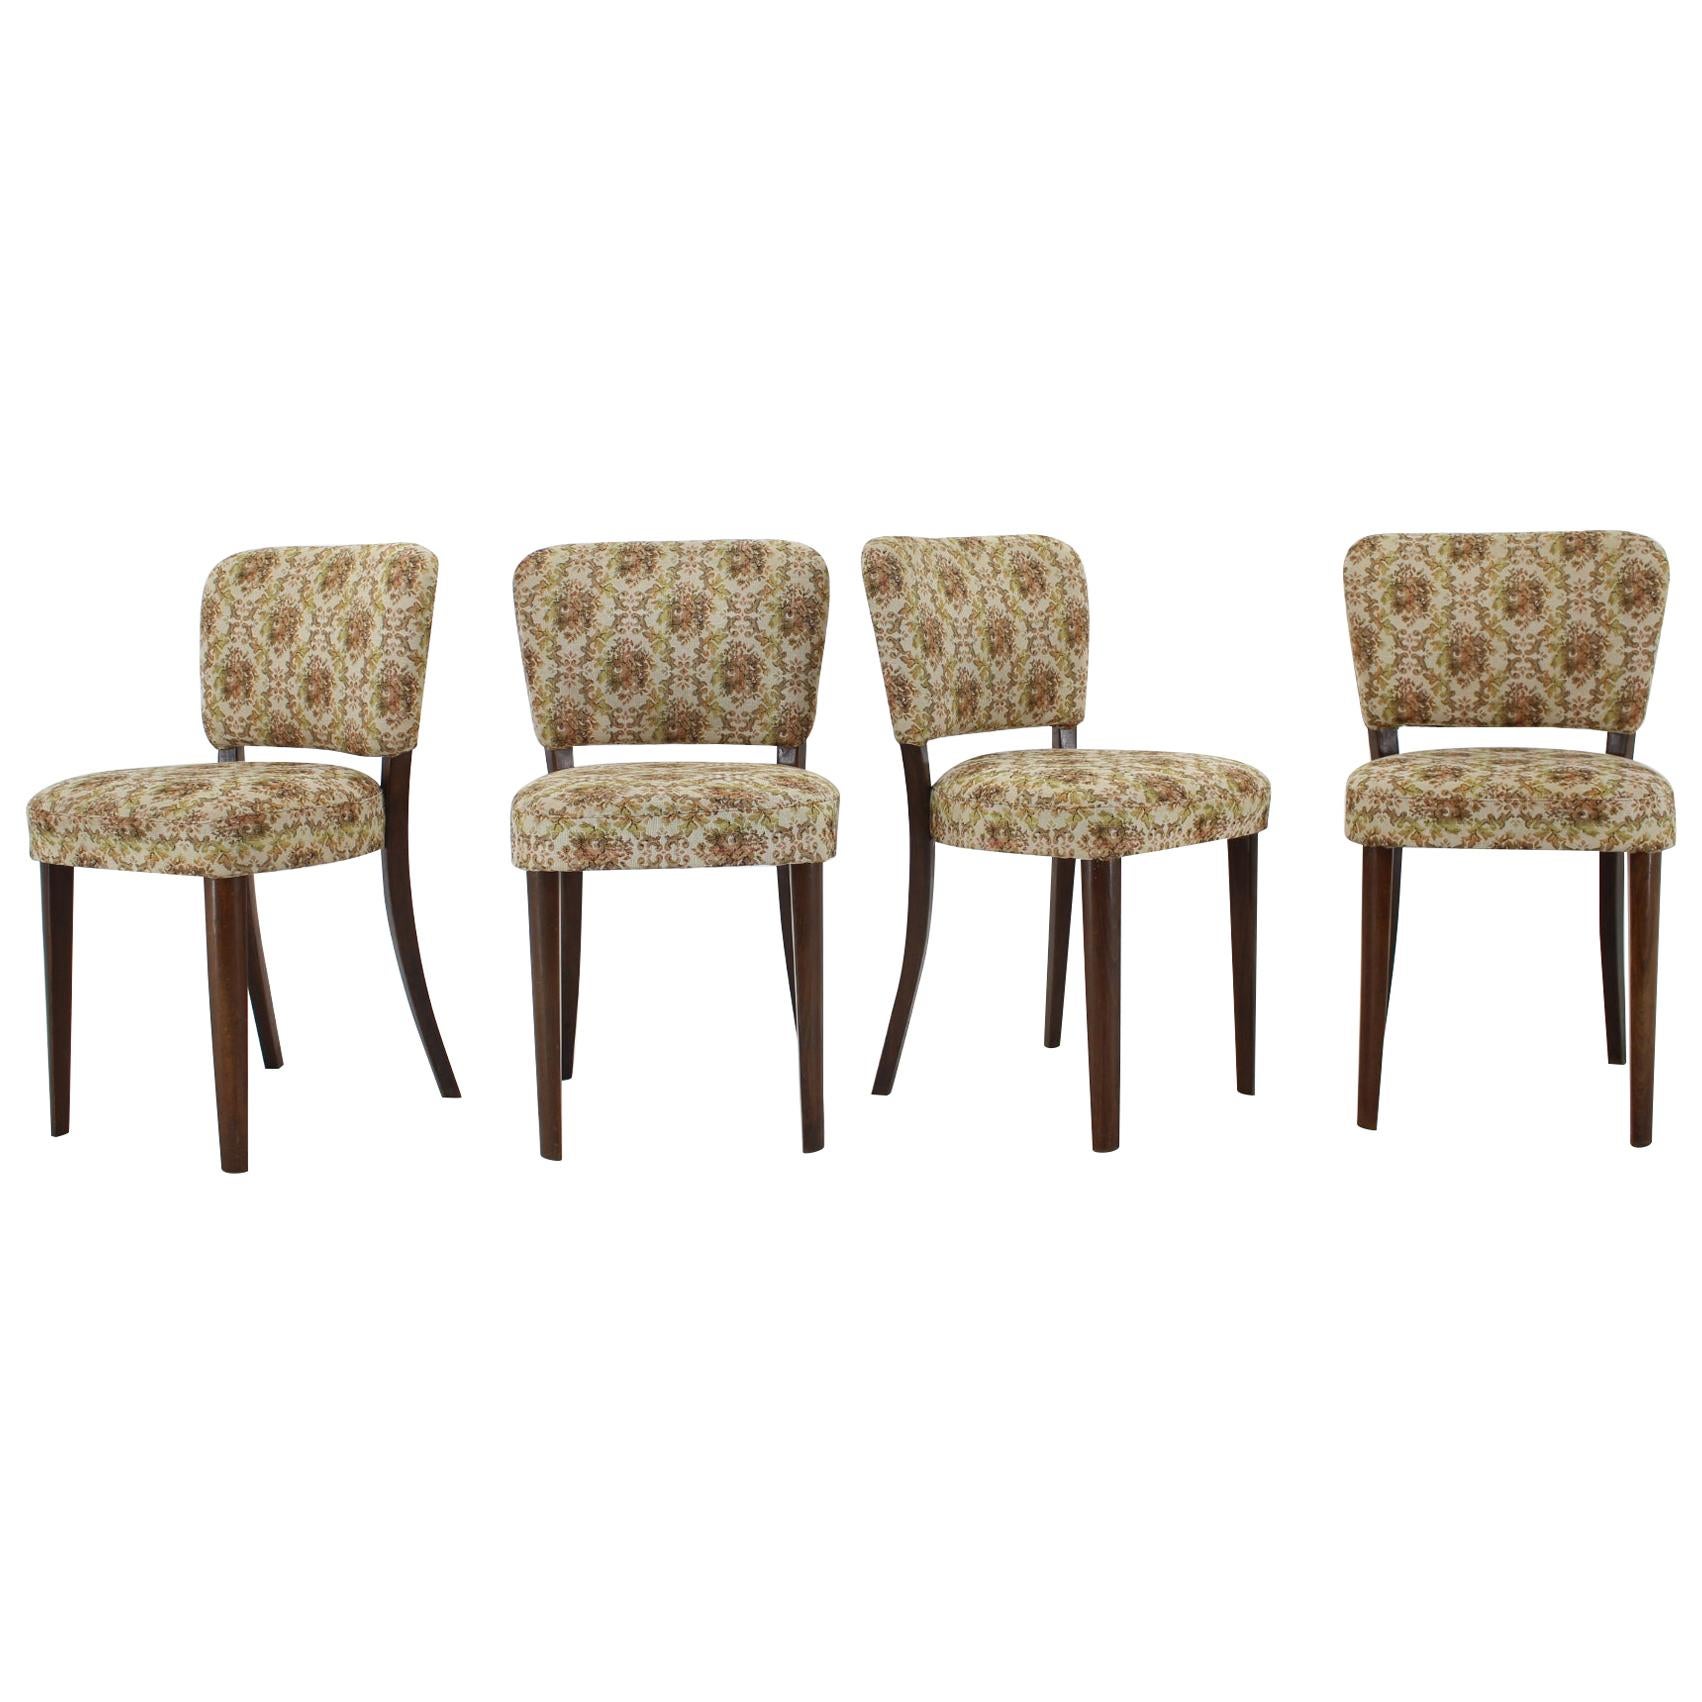 1950s Set of Four Dining Chairs, Czechoslovakia